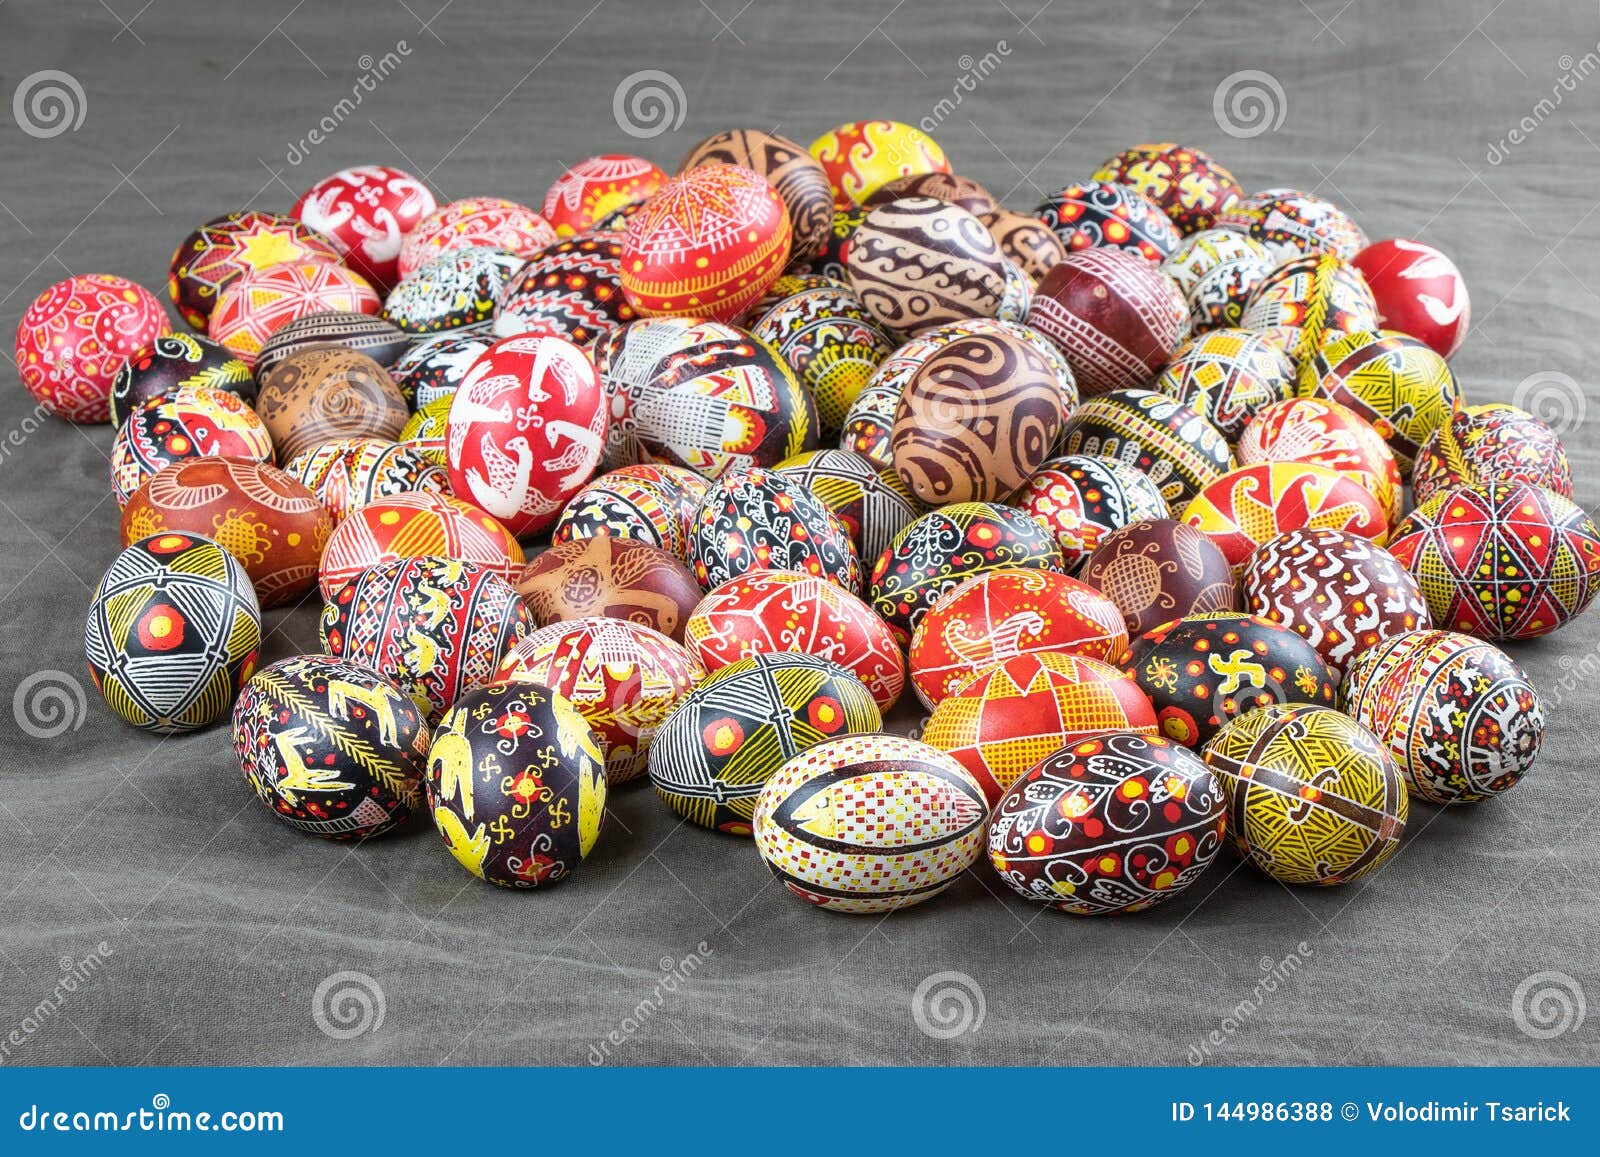 the easter eggs from the collection the peace of lidia borysenko